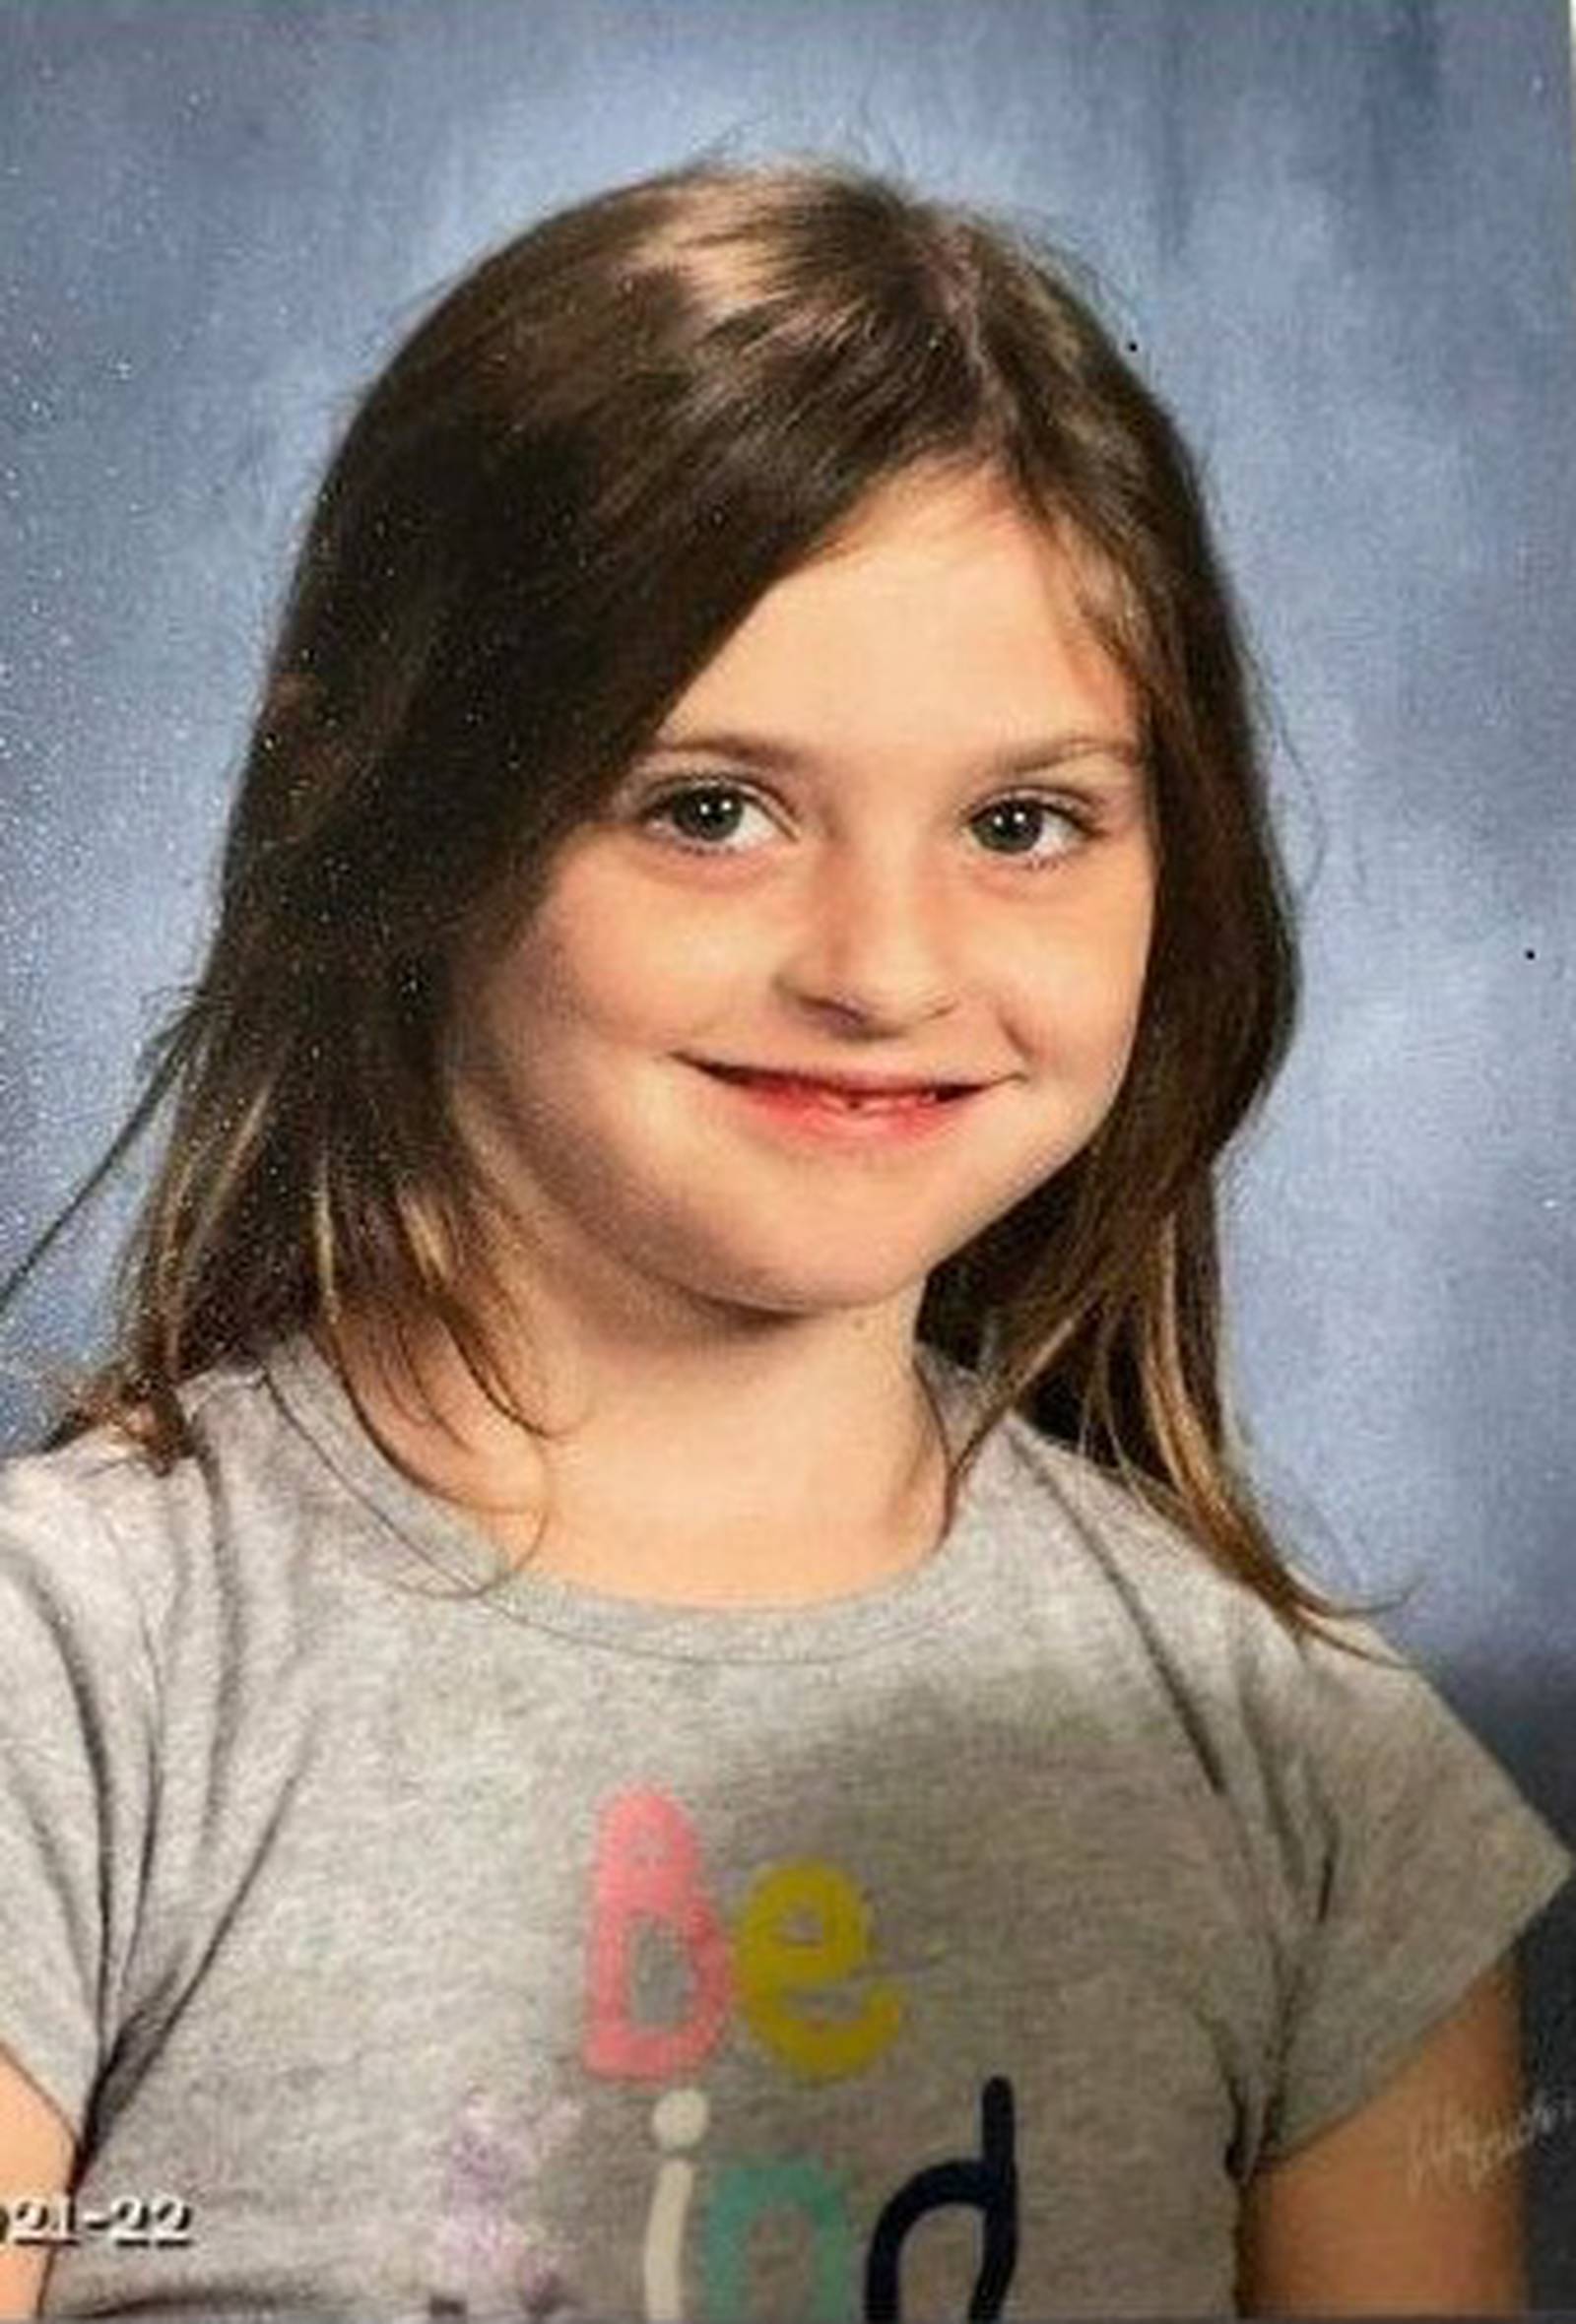 Update Amber Alert For 5 Year Old Girl Missing From Stark County Cancelled Whio Tv 7 And Whio 8203